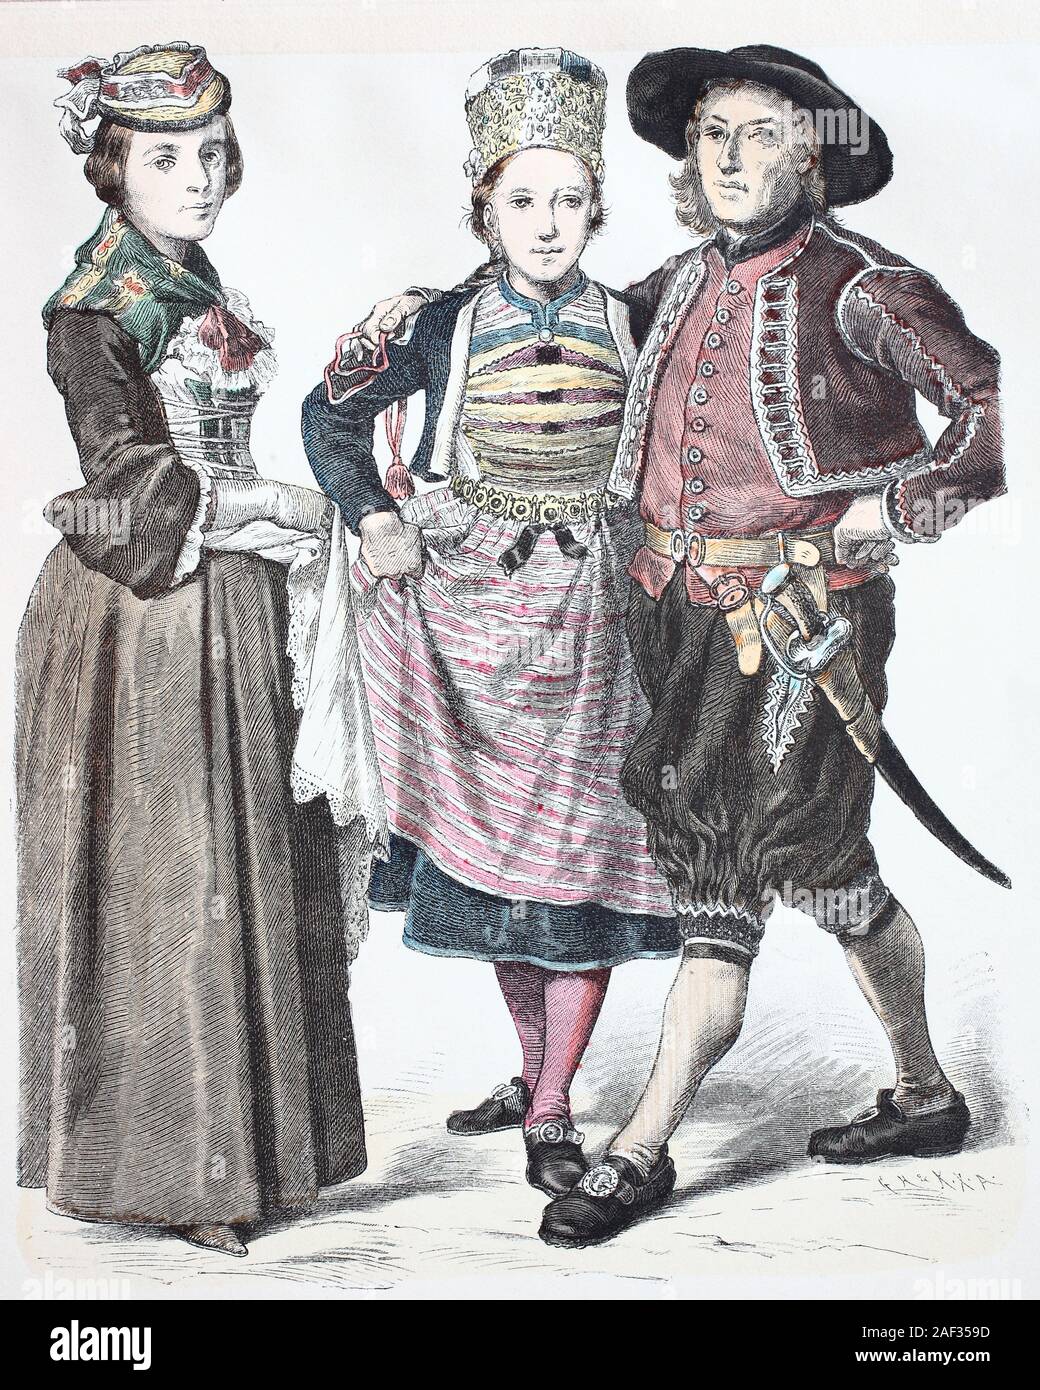 National costume, clothes, history of the costumes, national costume from  Valais and wedding national costume from Zurich, Switzerland, in the end of  18 century, Volkstracht, Kleidung, Geschichte der Kostüme, Tracht aus Wallis